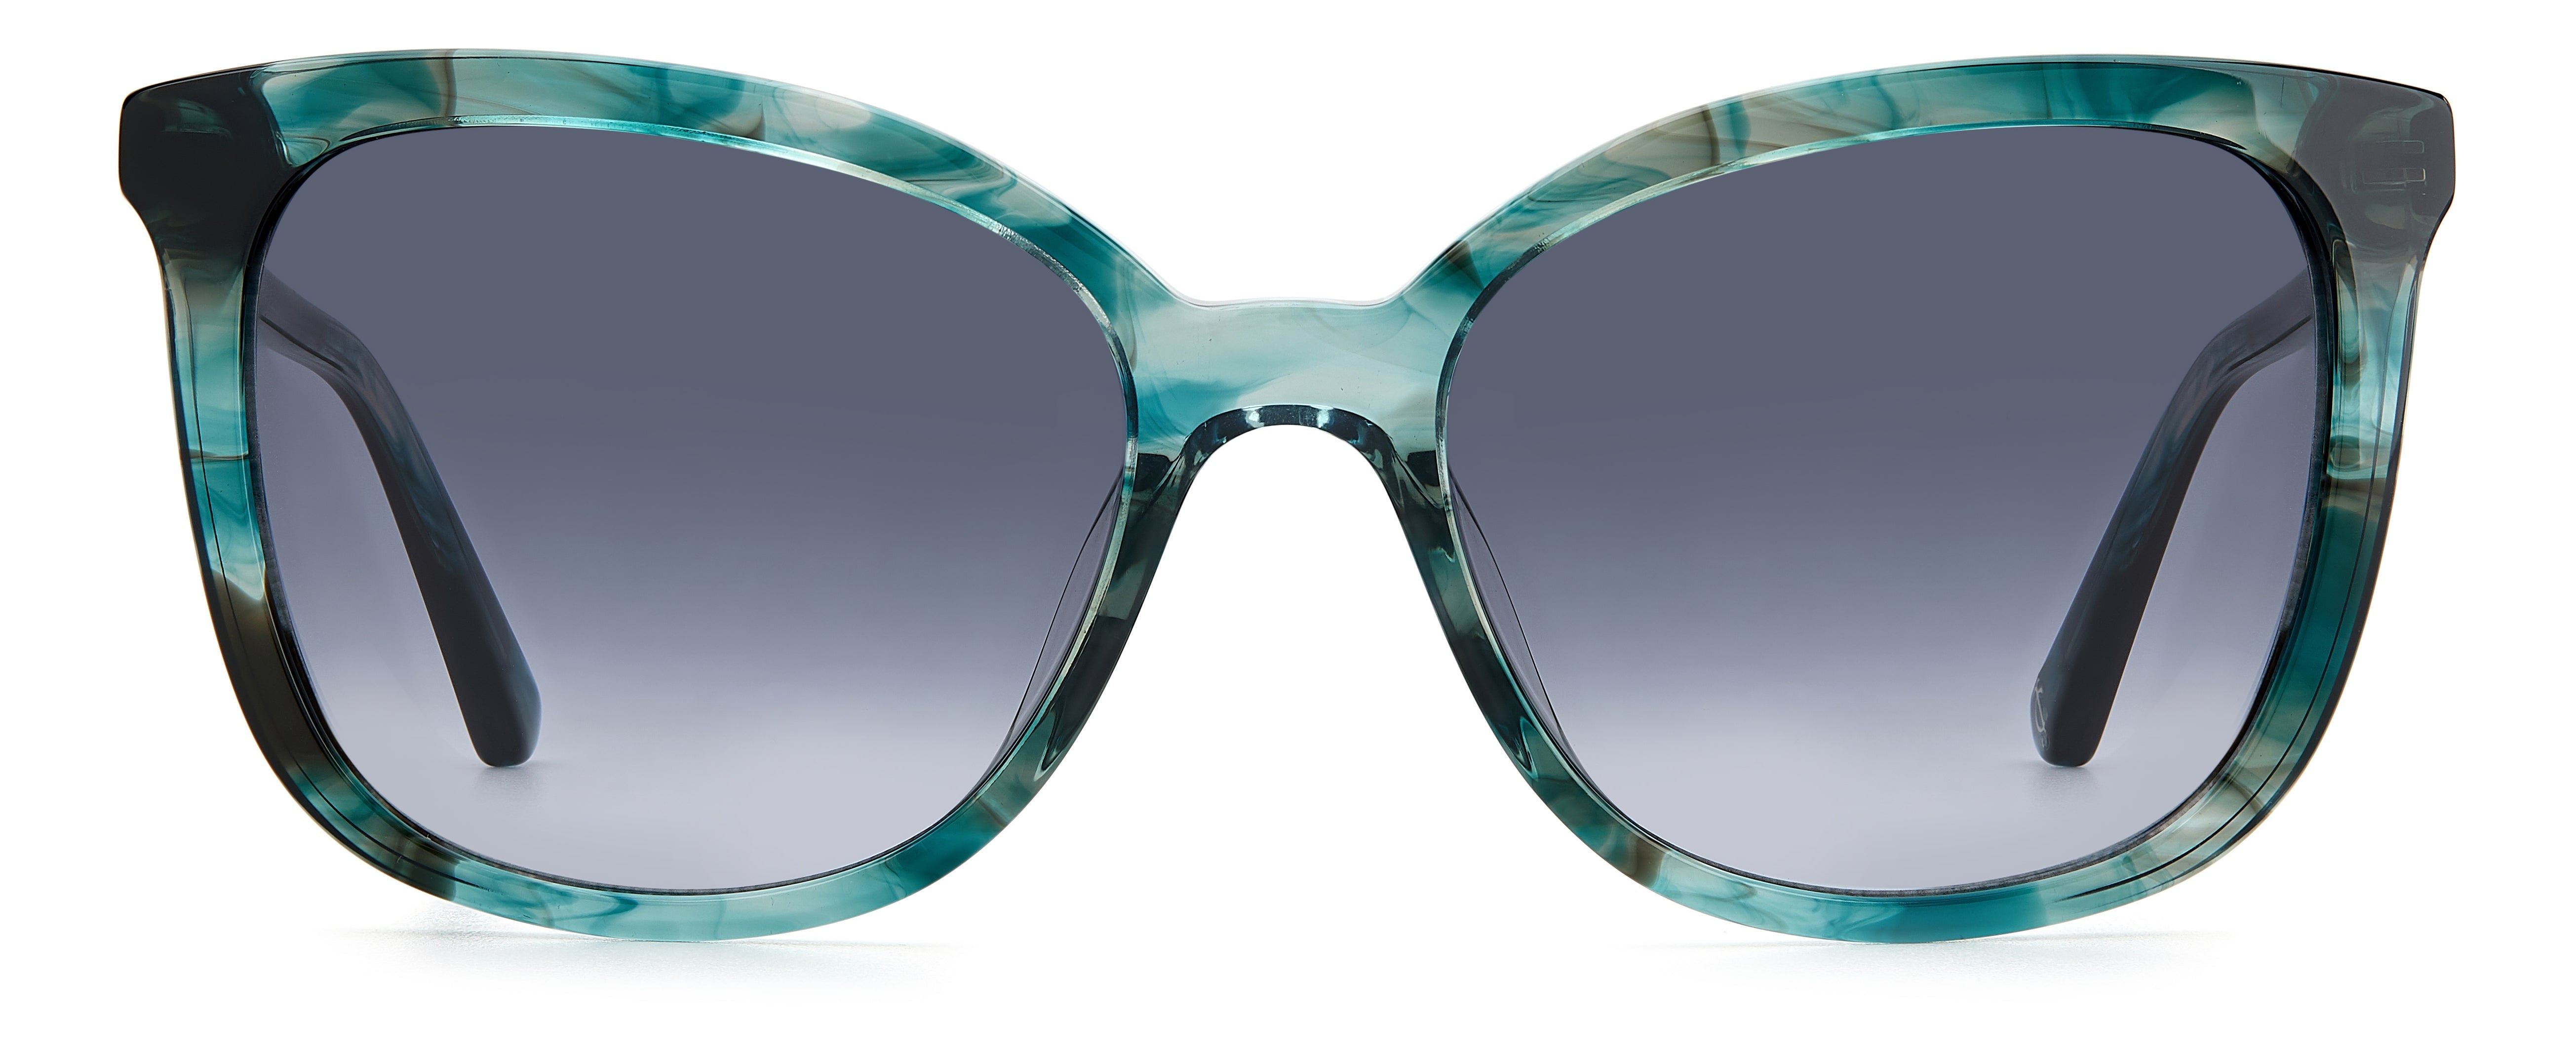 Juicy Couture Woman Oval Sunglasses